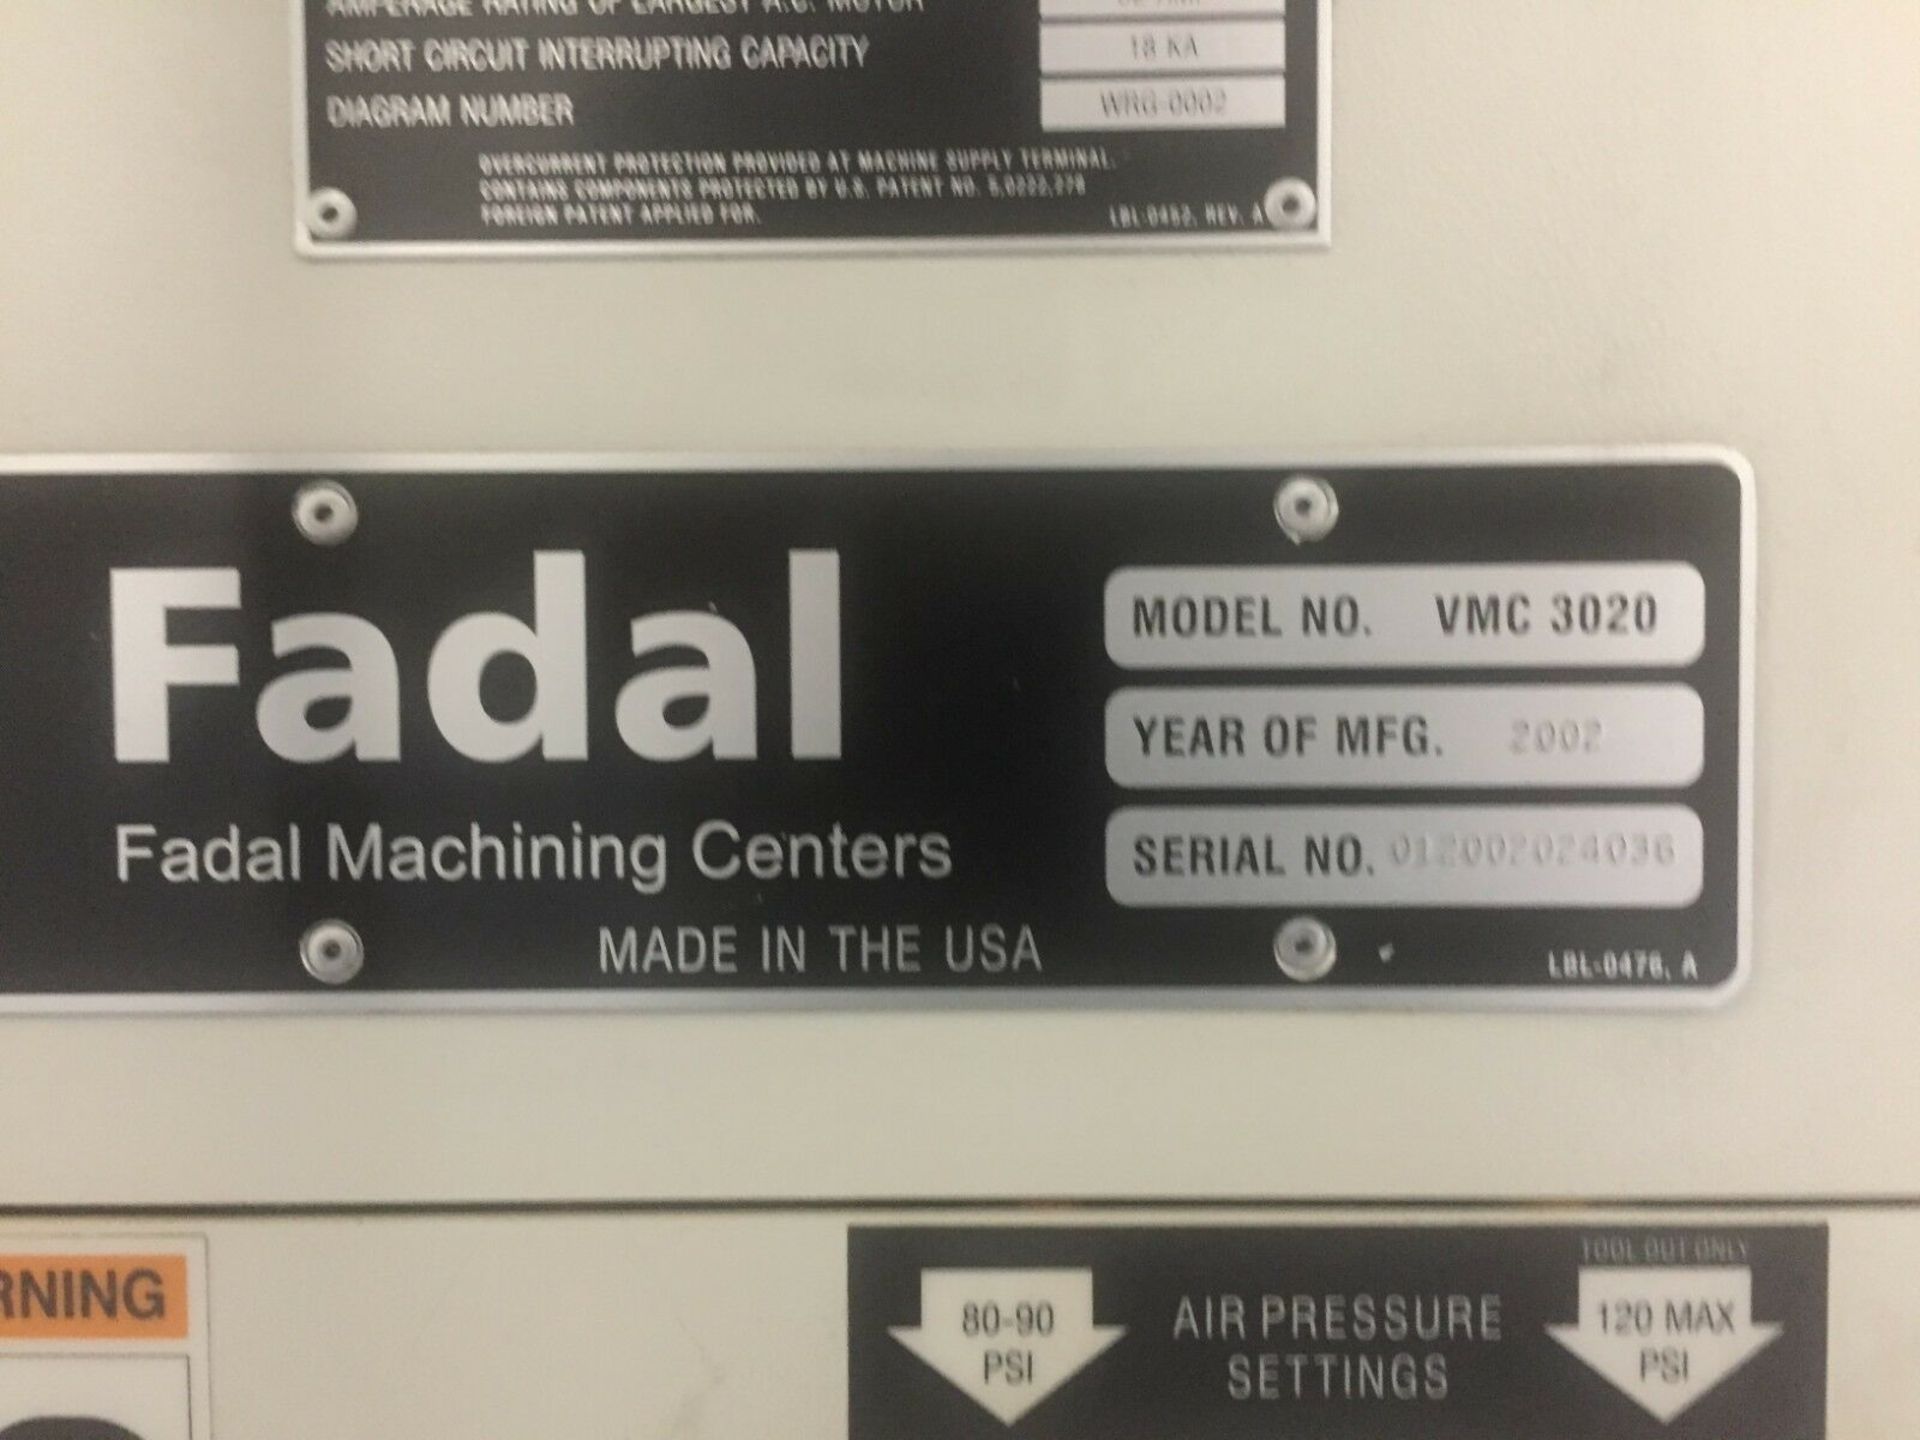 2002 FADAL 3020 VERTICAL MACHINING CENTER S/N 12002024036 Table Size 20" x 40.5", Max. Weight on - Image 9 of 9